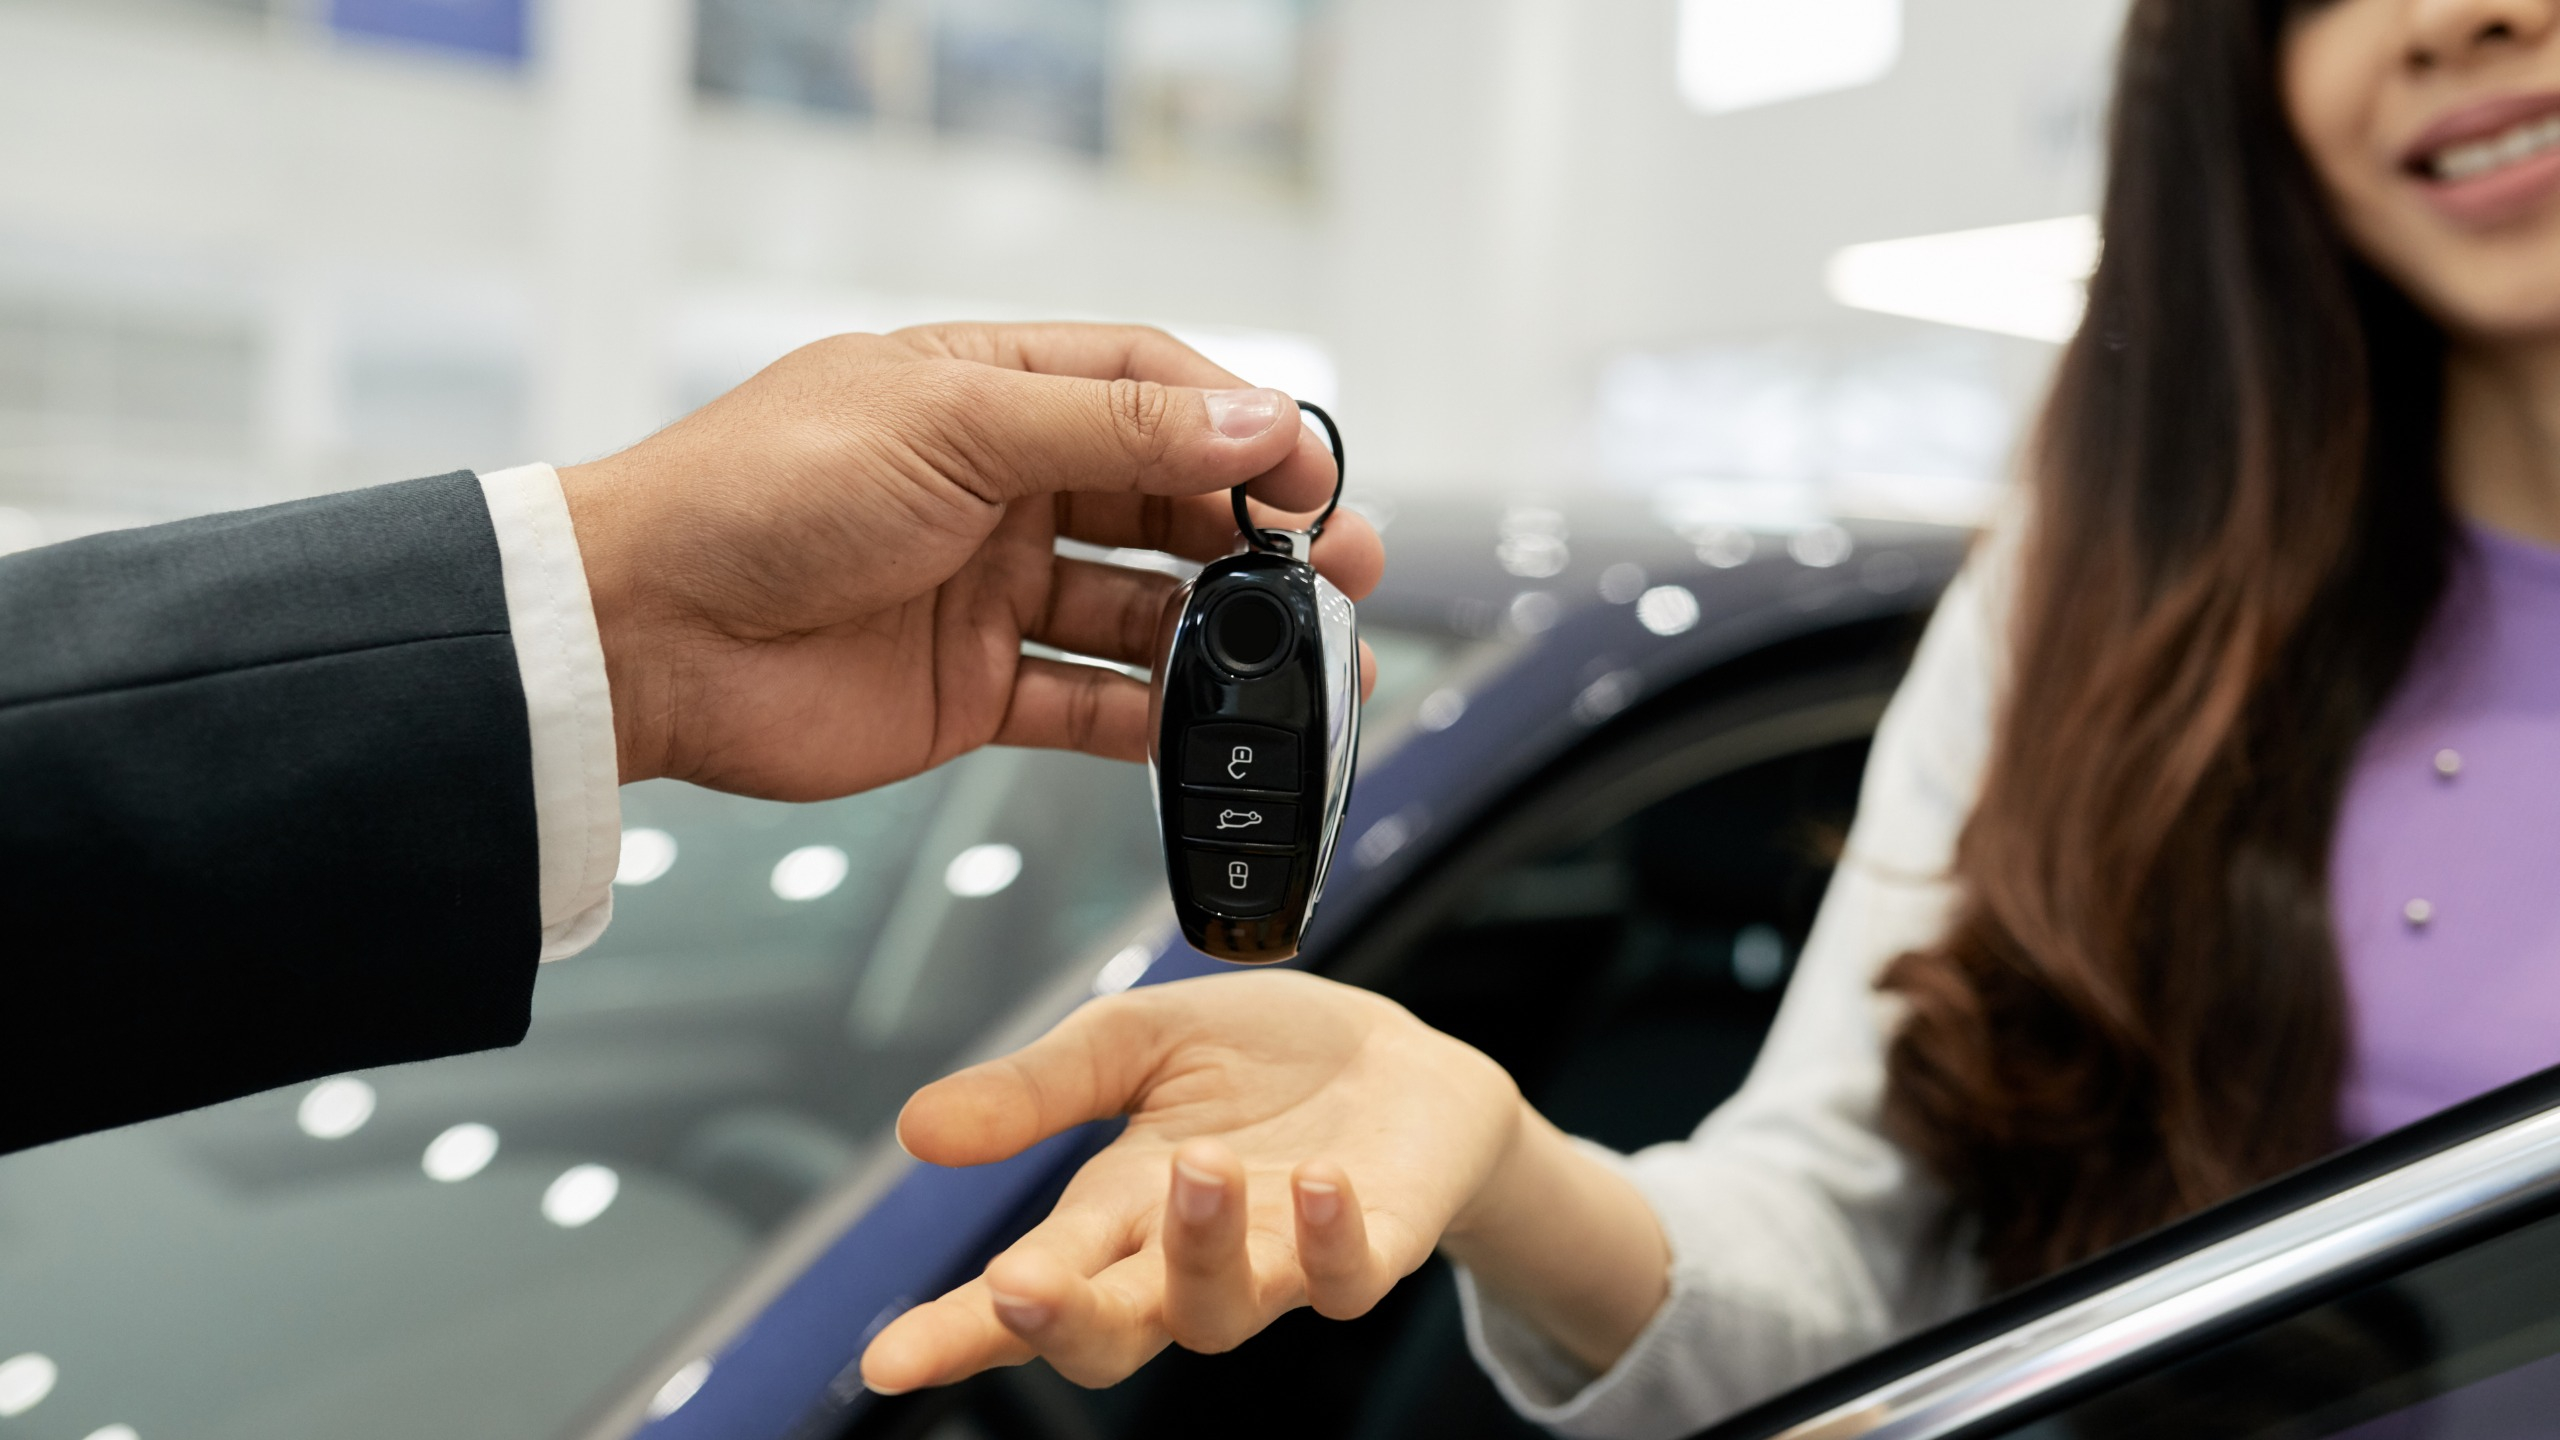 How Does Auto Key Pro Help If You Lost Your Car Key Fob?